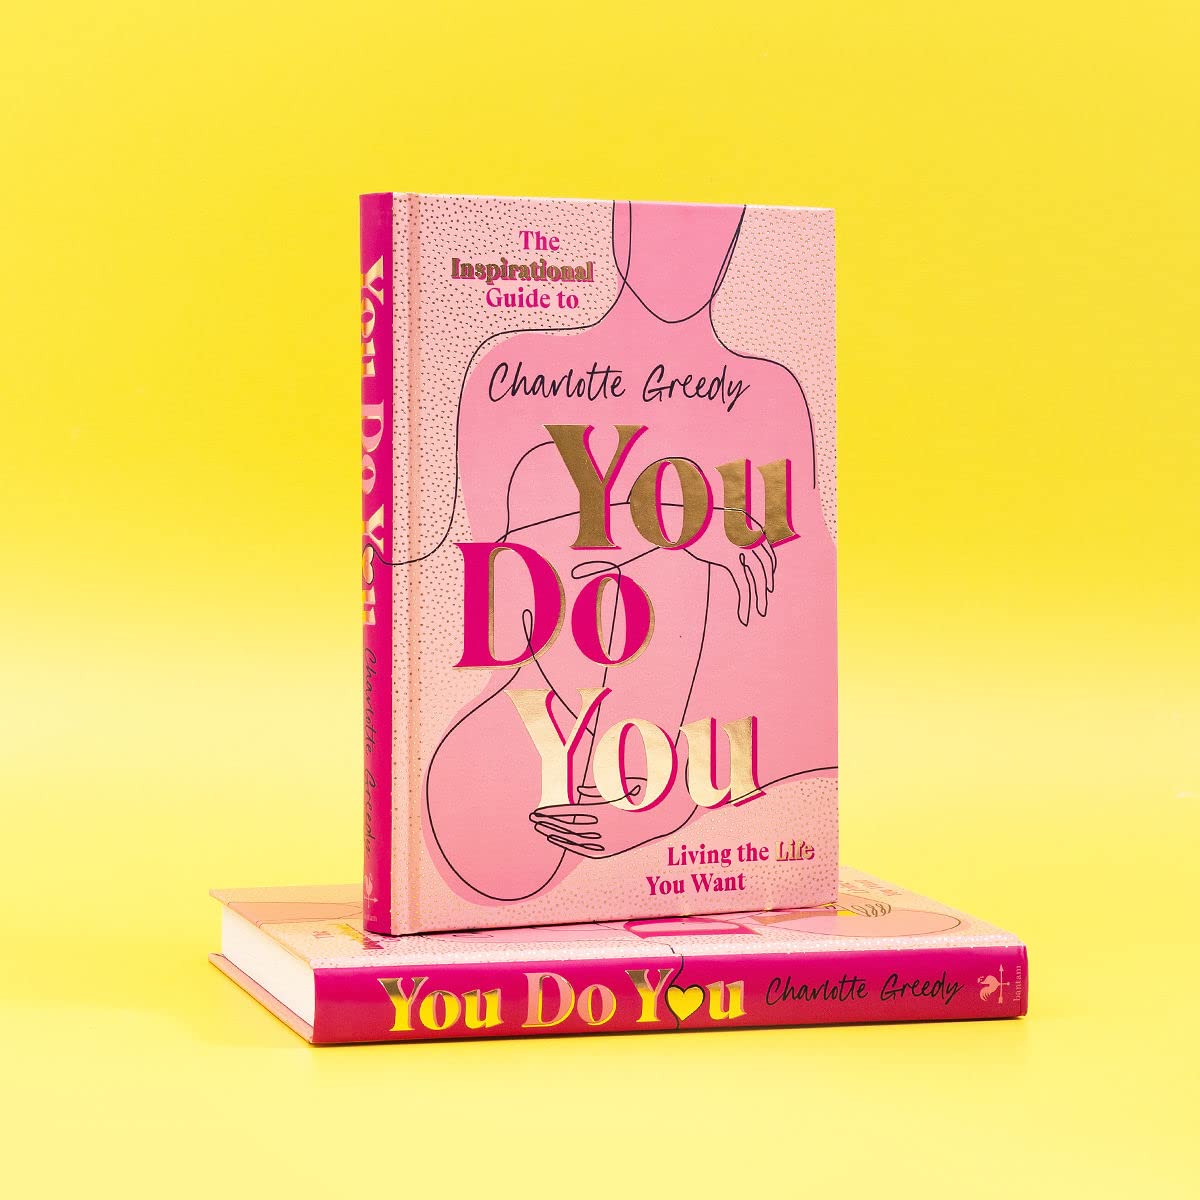 You Do You by Charlotte Greedy is out now! | News | Bell Lomax Moreton